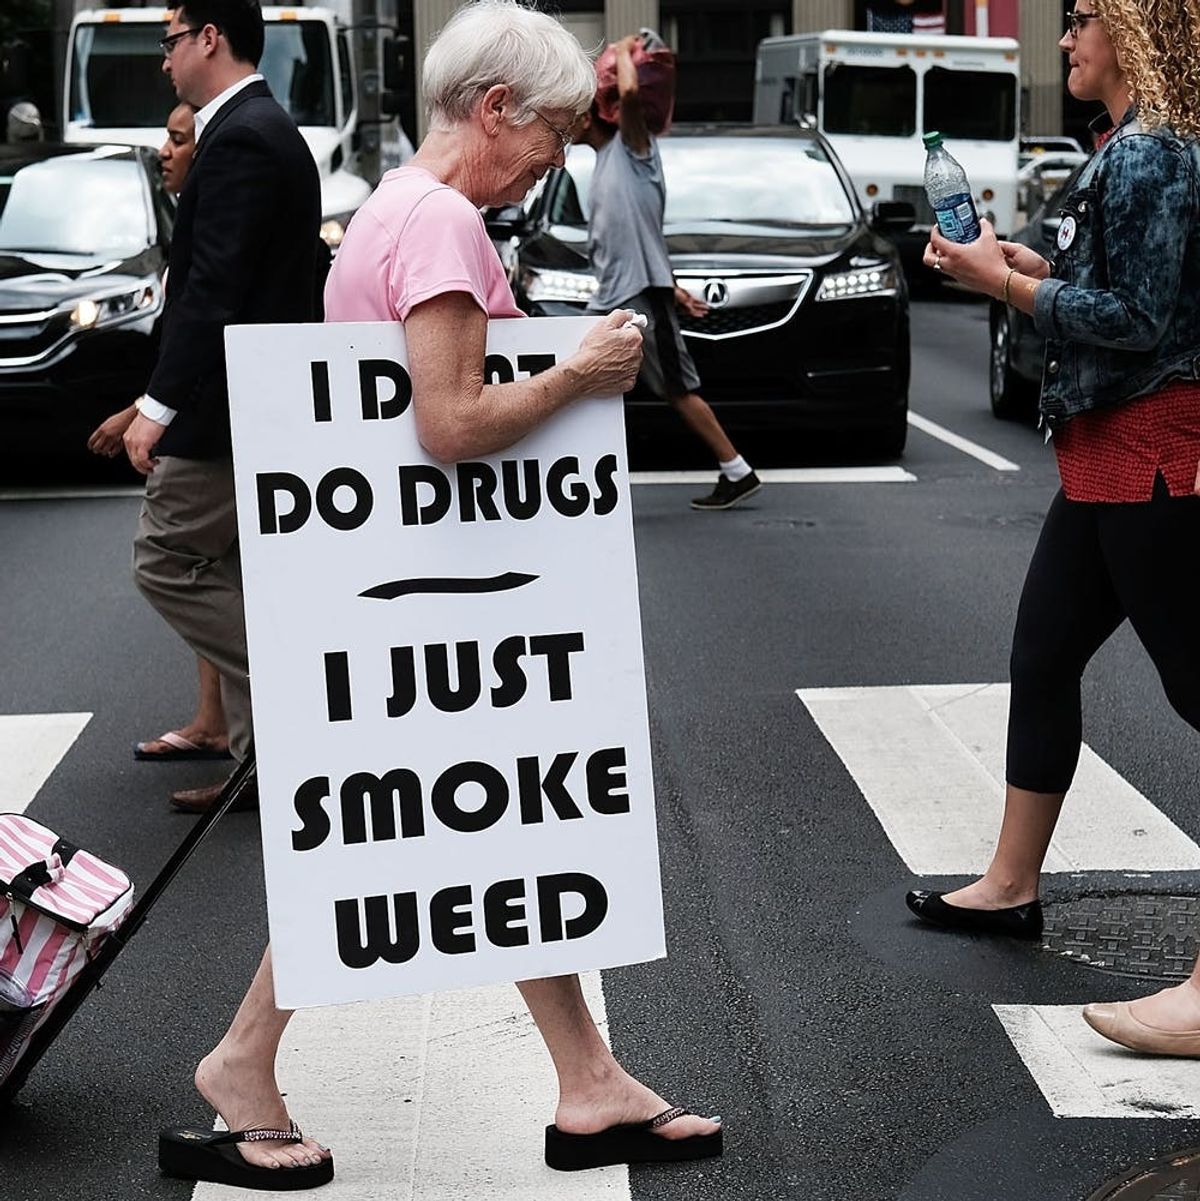 A New Poll Finds That Over 60 Percent of Americans Support Marijuana Legalization